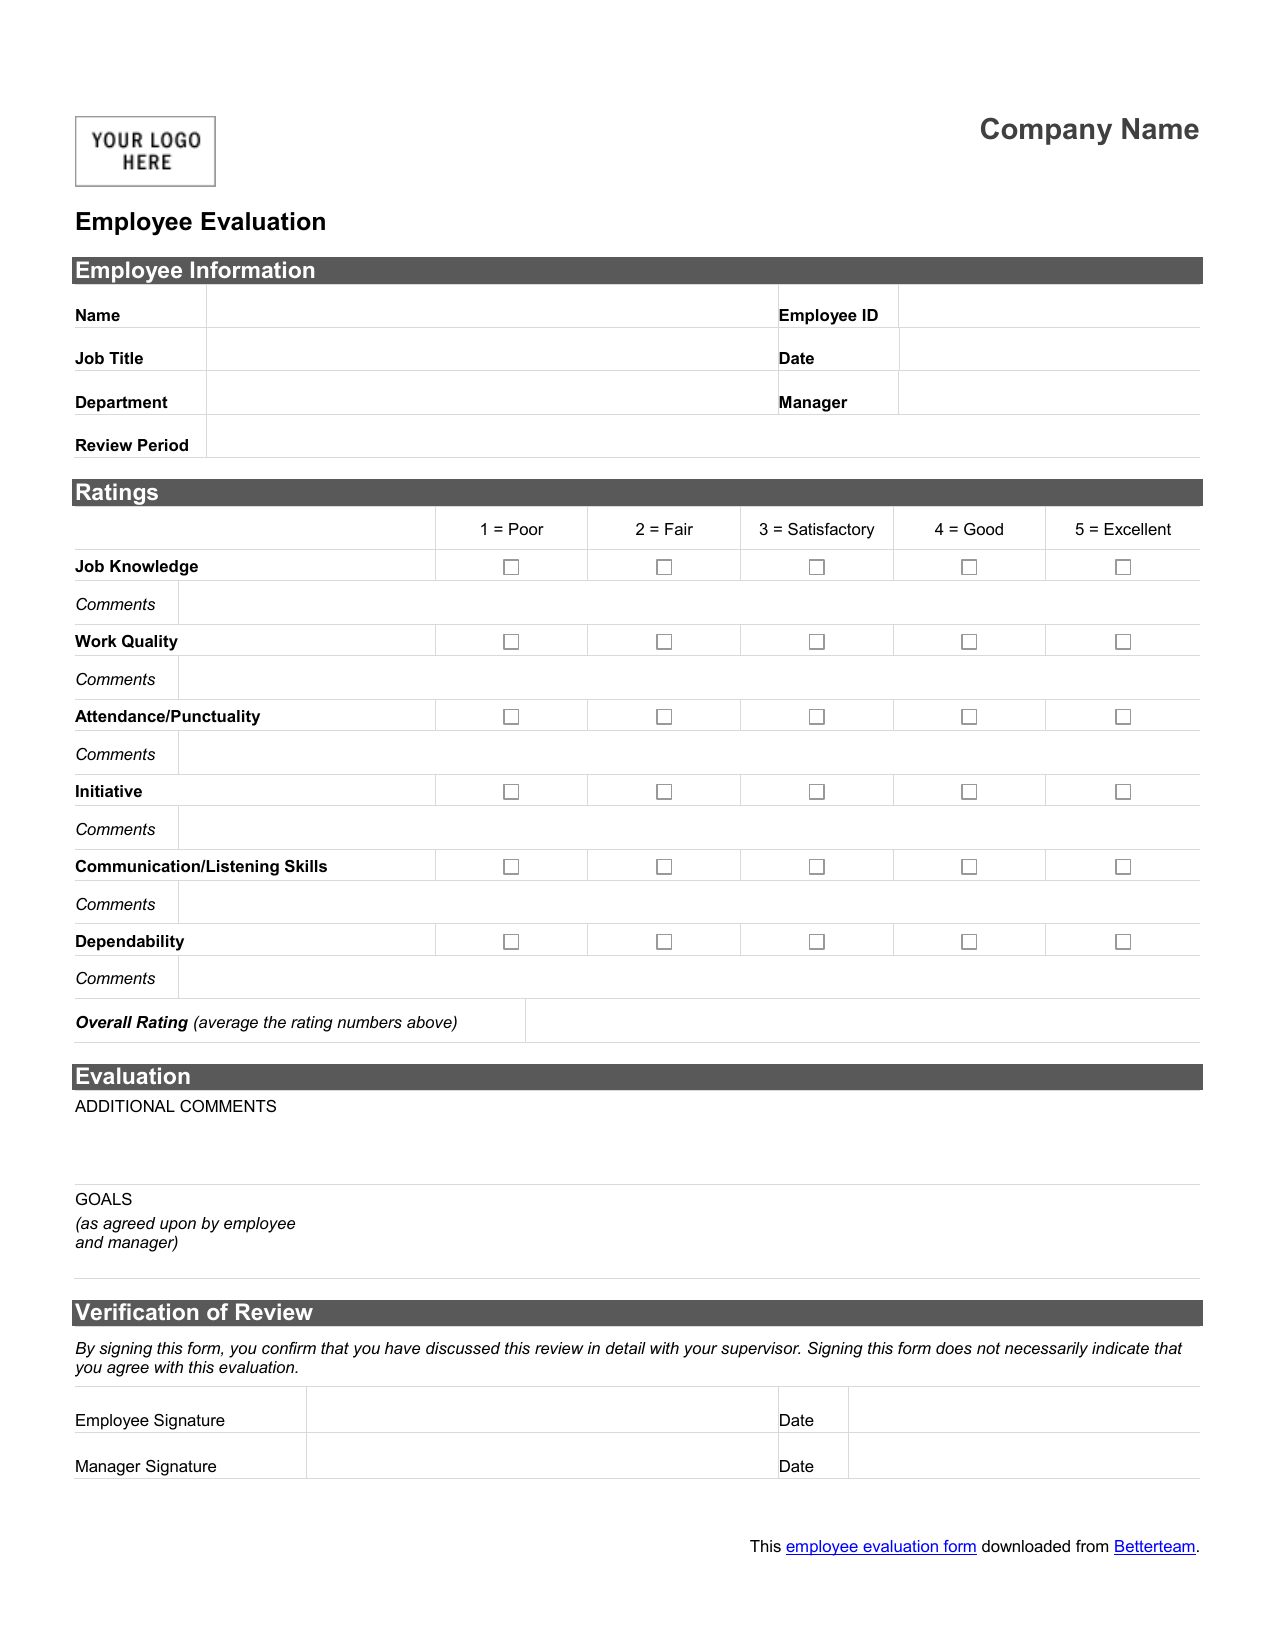 Employee evaluation form download 20170810